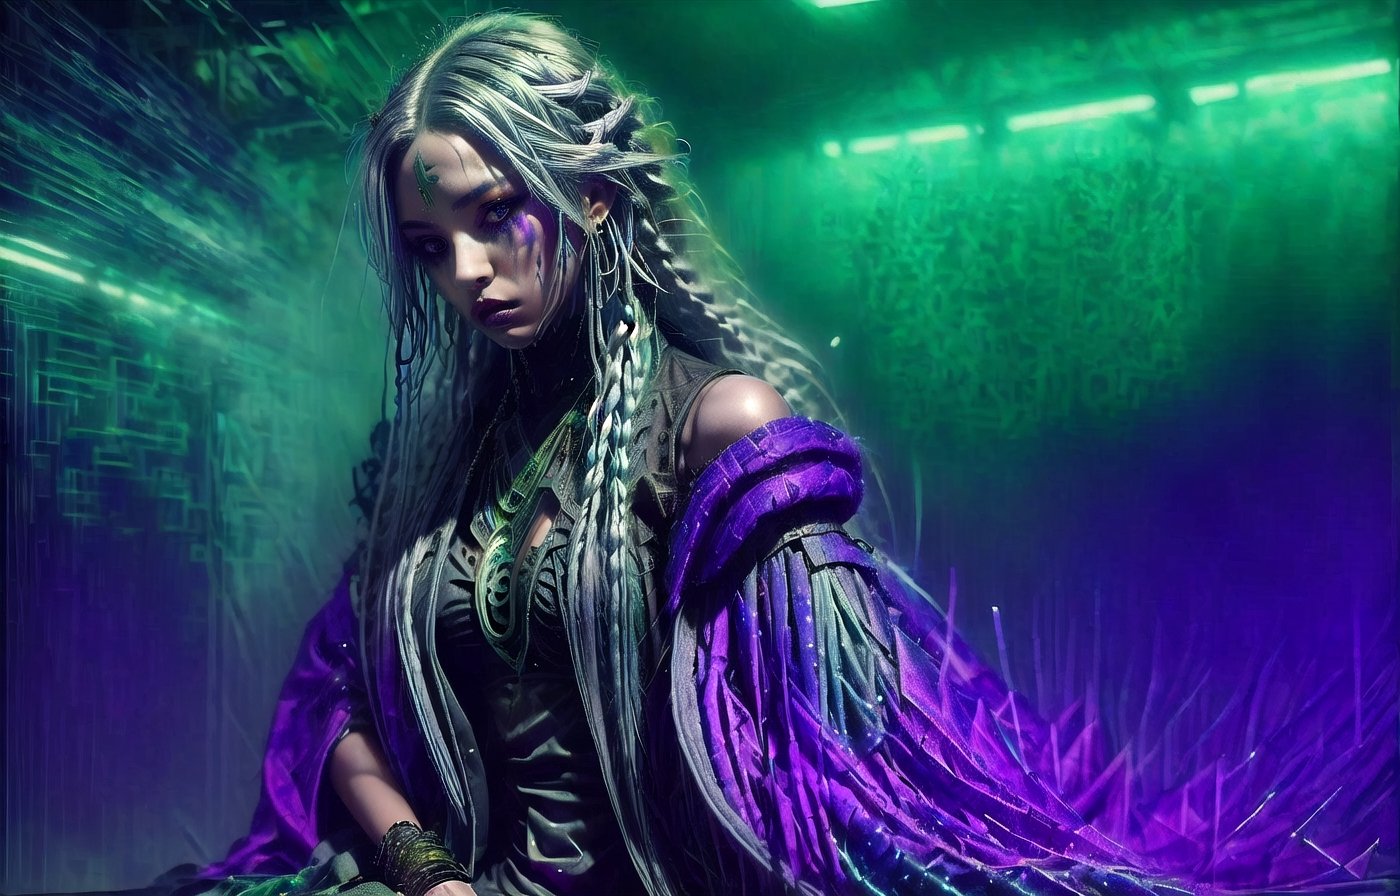 A beautiful sorceress in a unique robe blackest black with undertones of greens, blues, and purples with specks af silver glitter through. The sorceress resembling a Russian woman with very Nordic features with a very long gray blonde braided hair she is striking and mysterious 